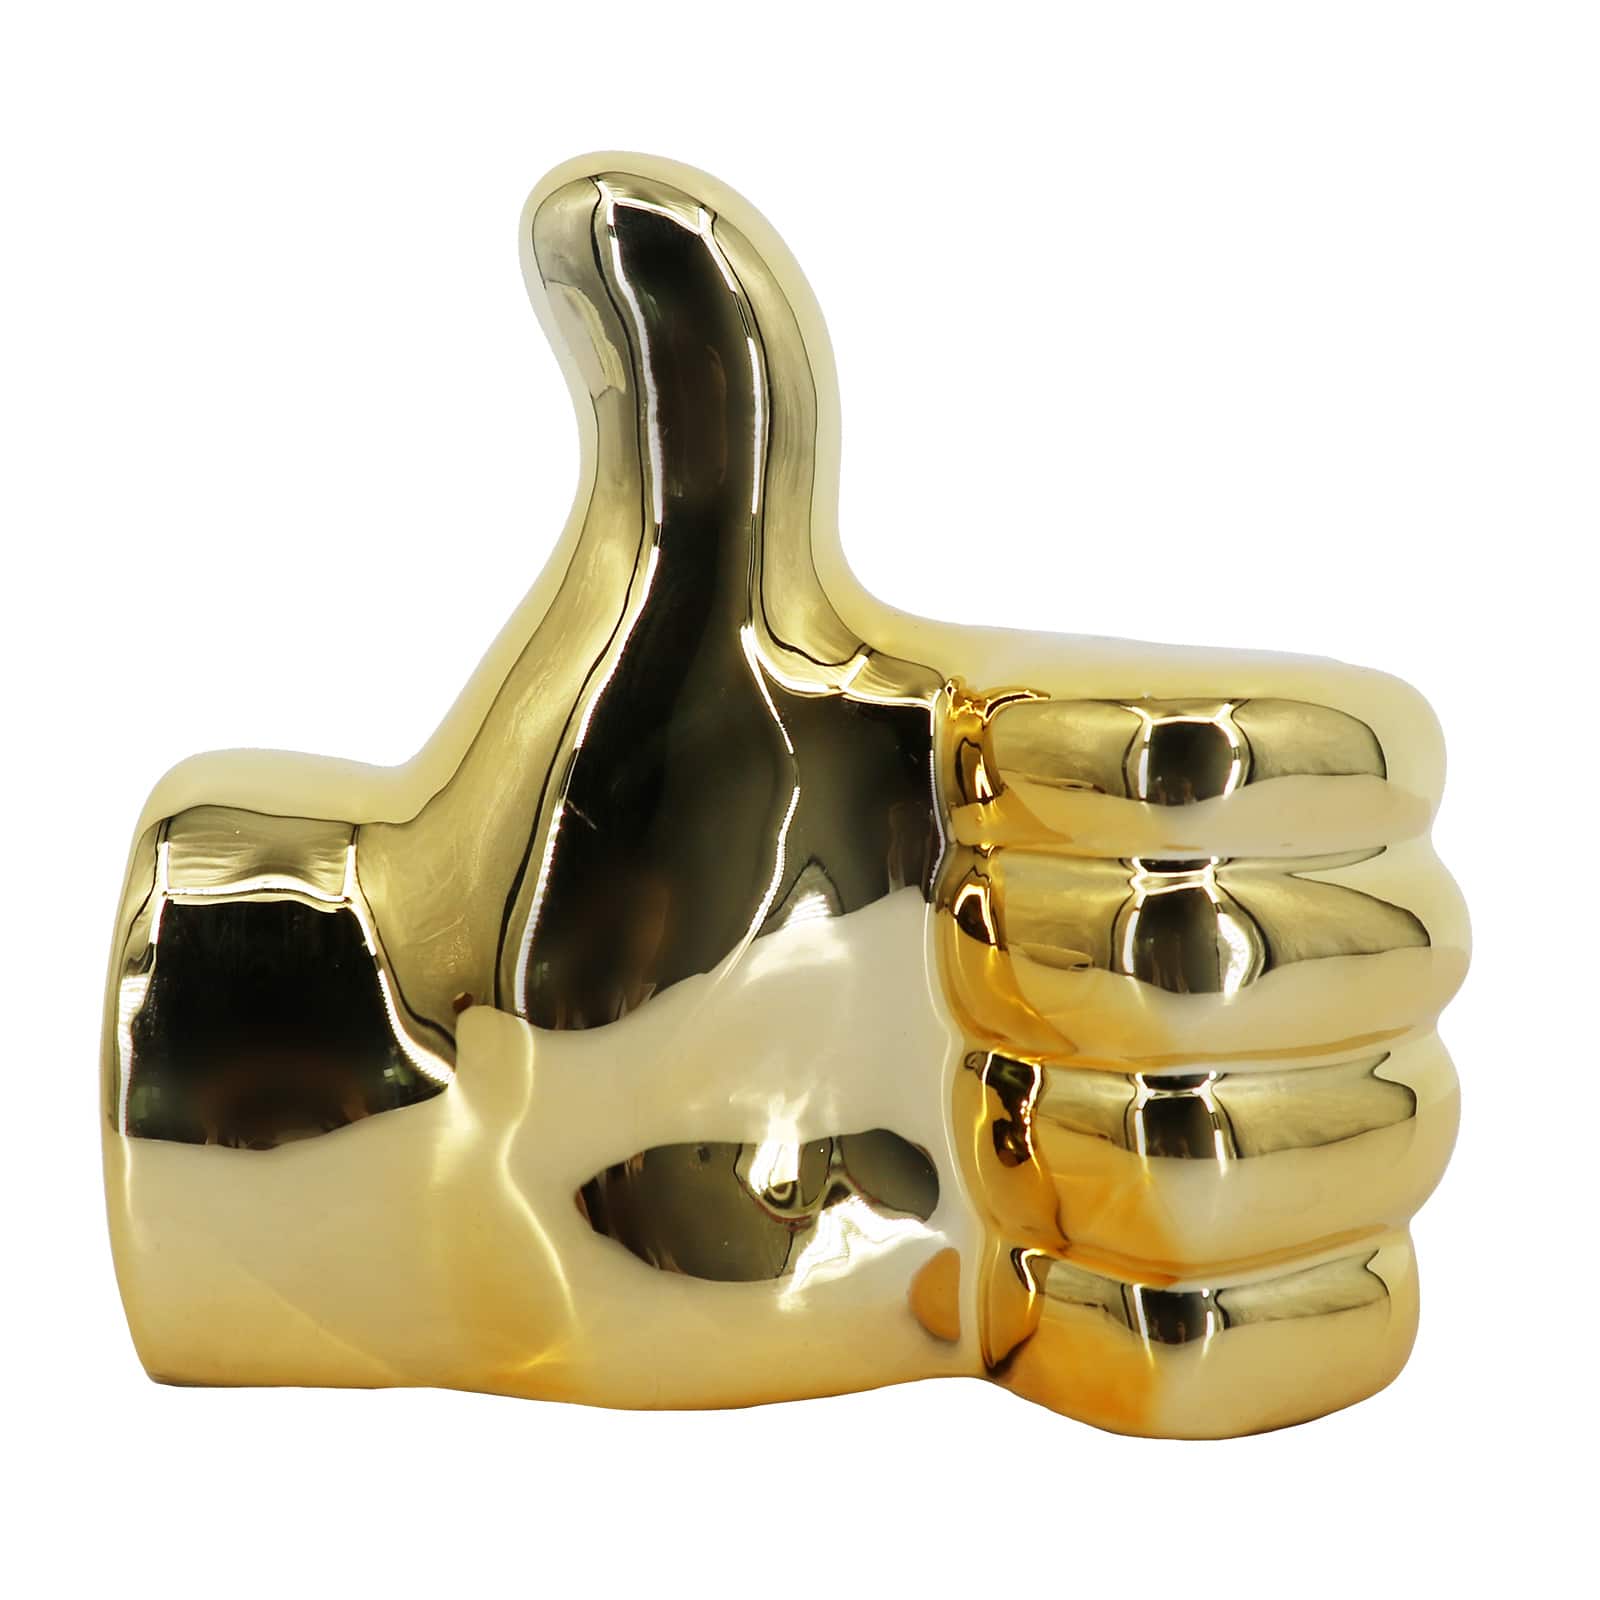 5 Gold Ceramic Thumbs Up Tabletop Décor by Ashland®